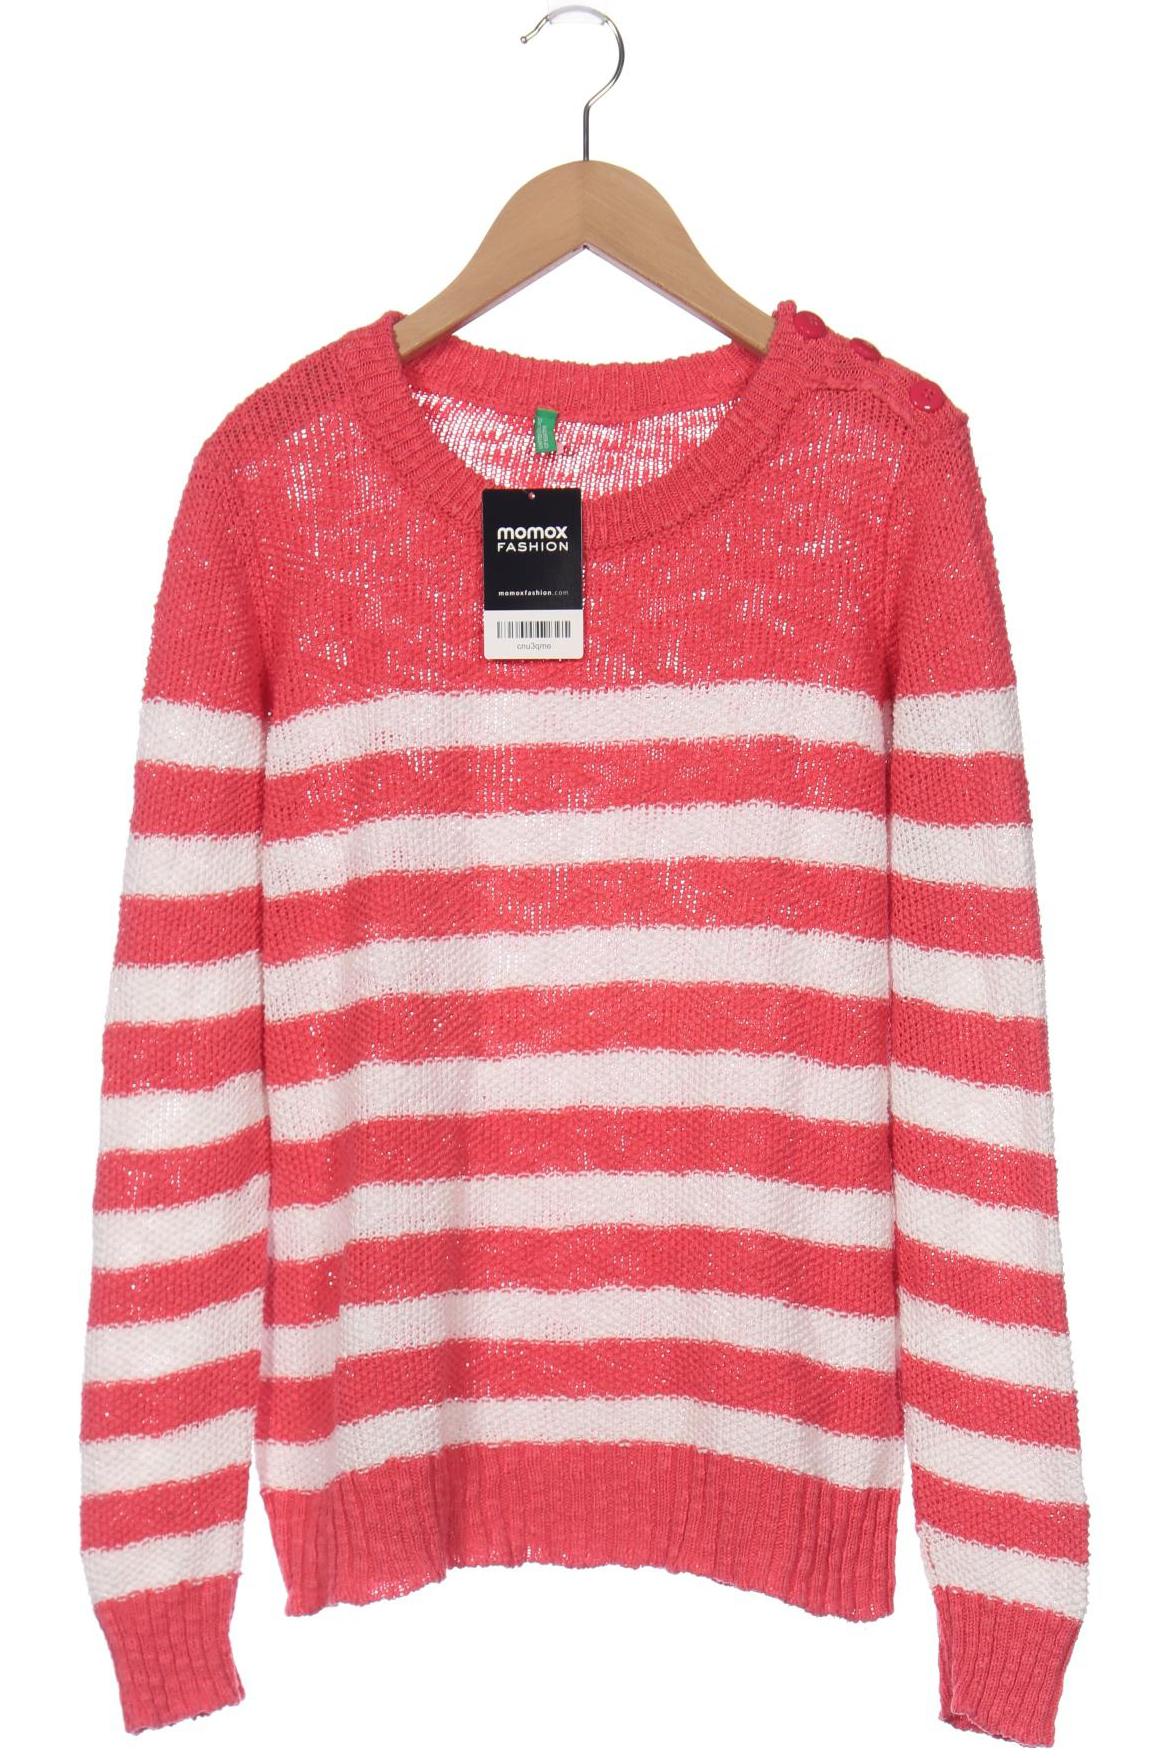 UNITED COLORS OF BENETTON Damen Pullover, pink von United Colors of Benetton